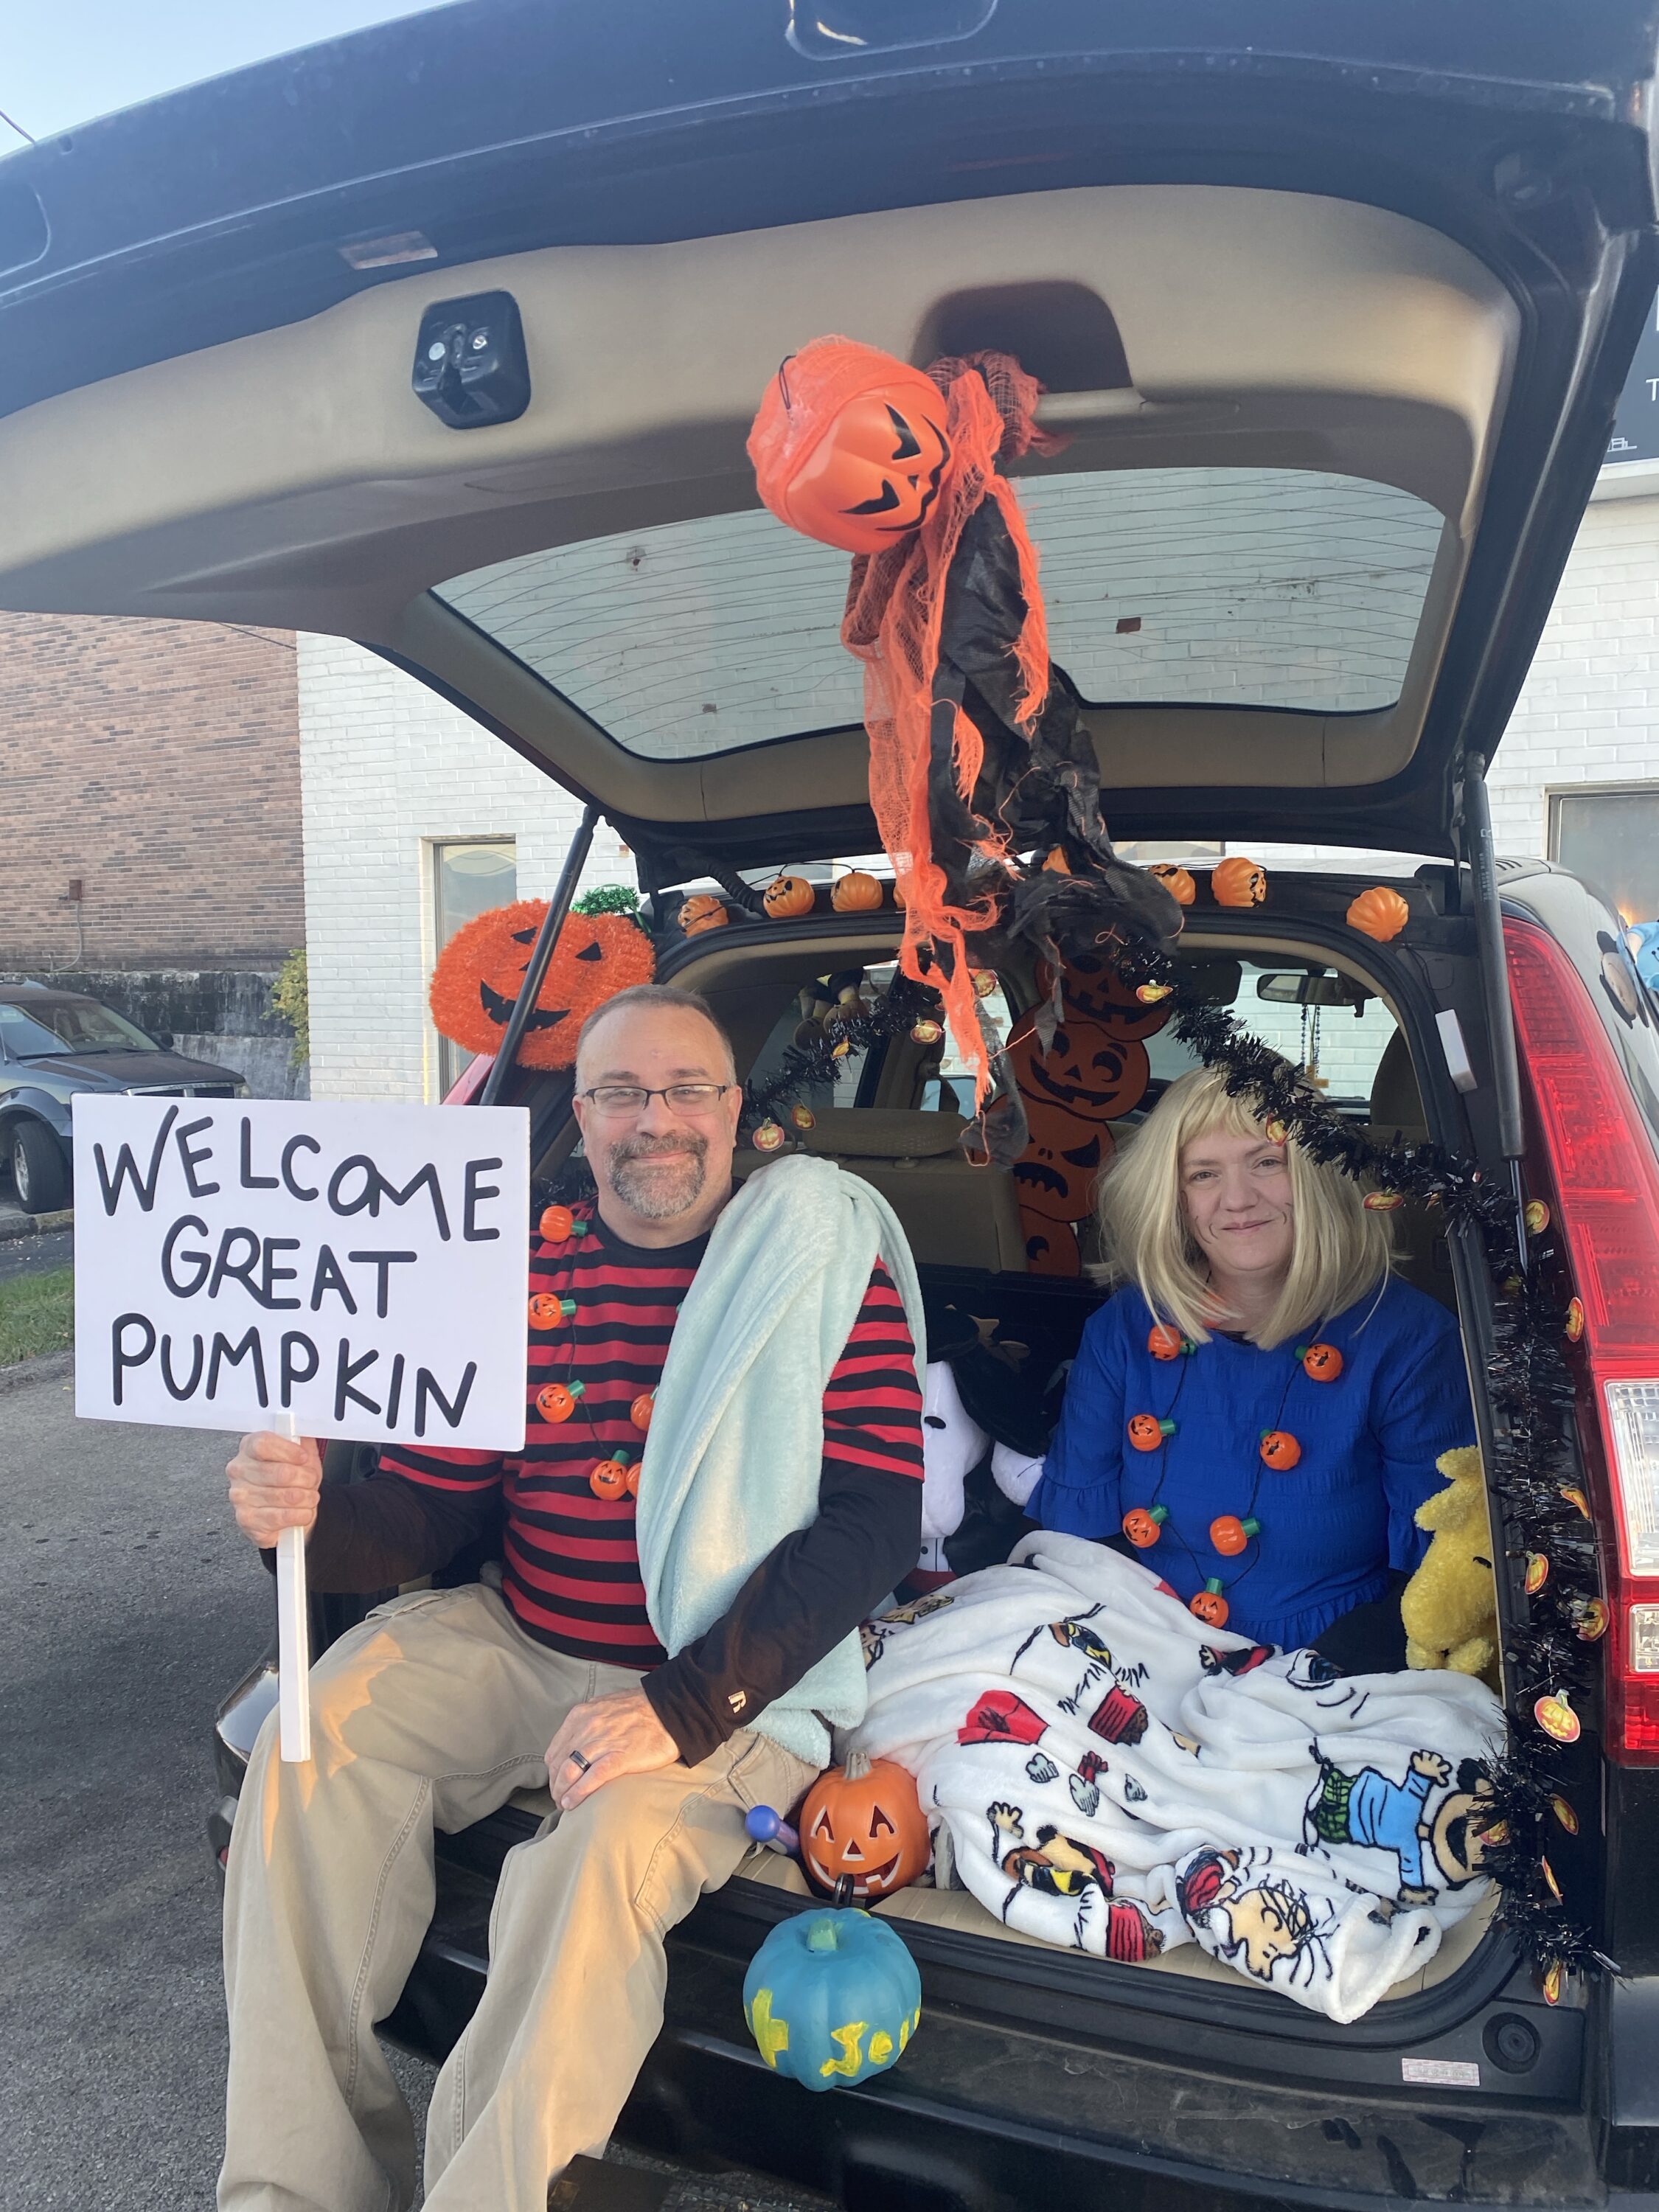 Great Pumpkin Trunk or Treats - my wife and I dressed up and set up as Linus and Sally from The Great Pumpkin Charlie Brown. #GreatPumpkin